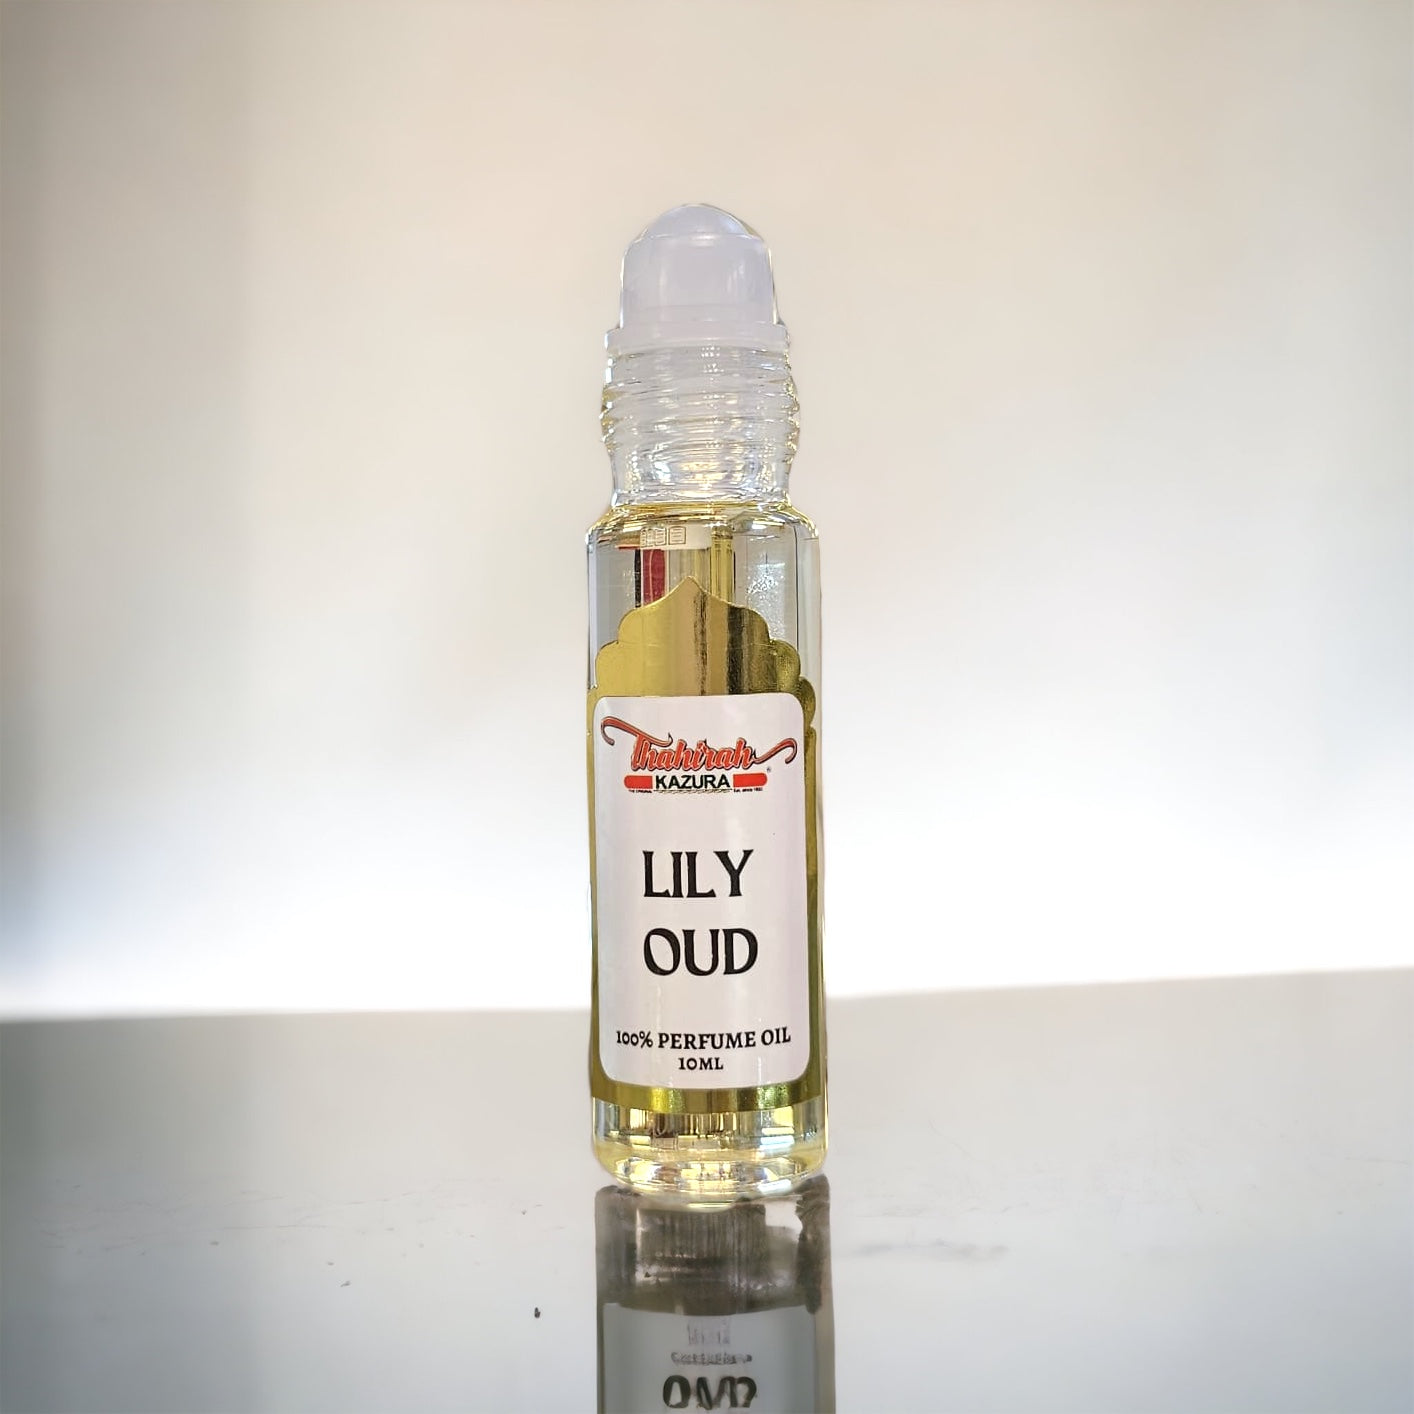 LILY OUD